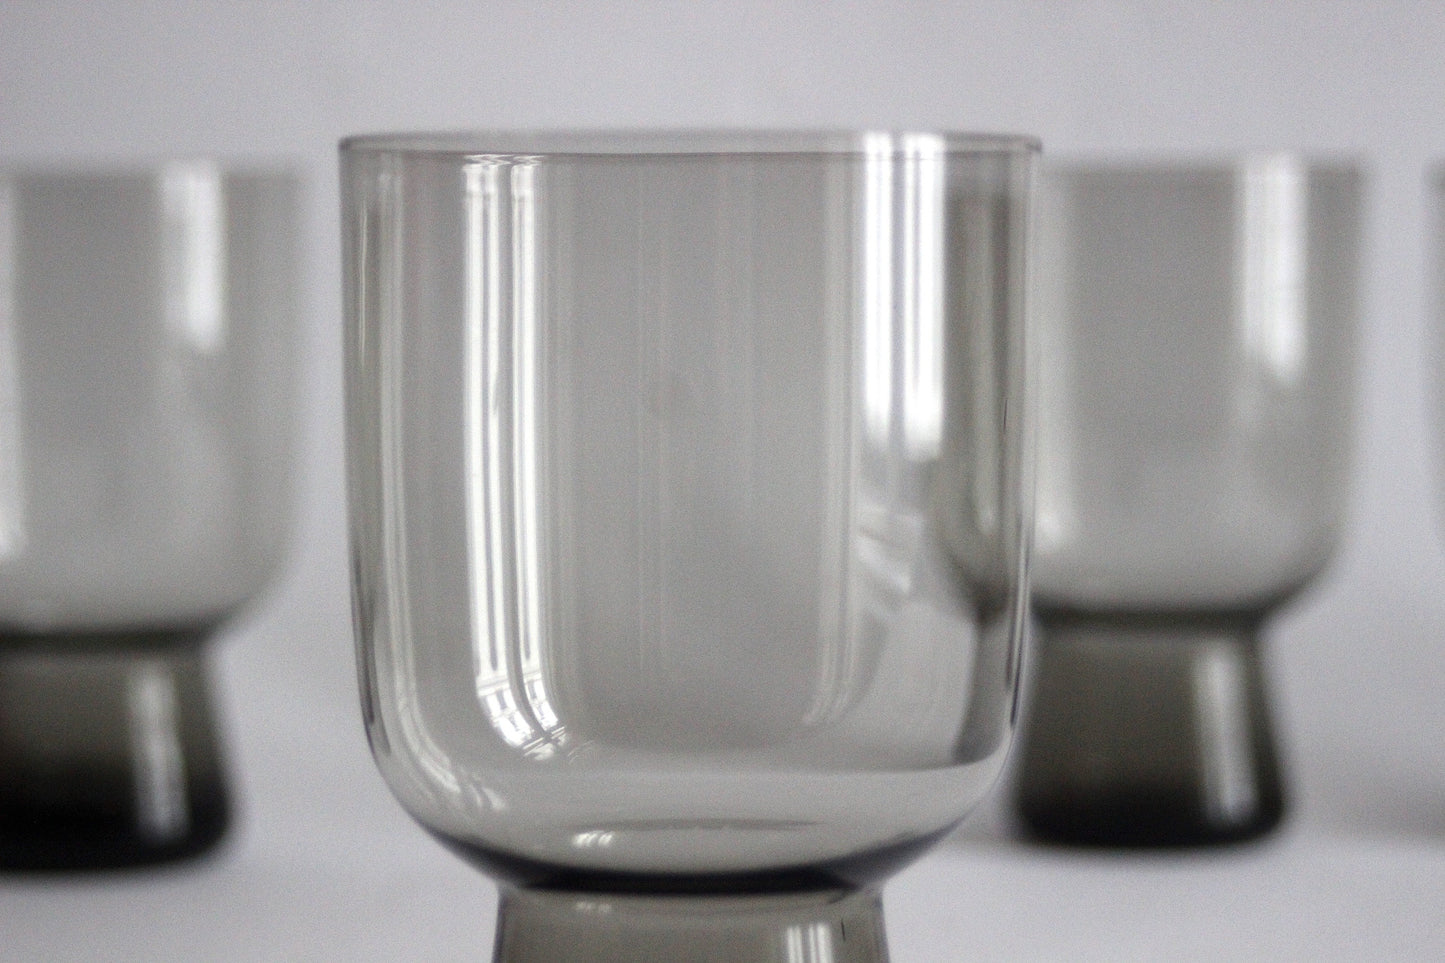 Vintage smoked blown glass set of 6 drinking glasses. Handmade, 70s. Minimalistic style